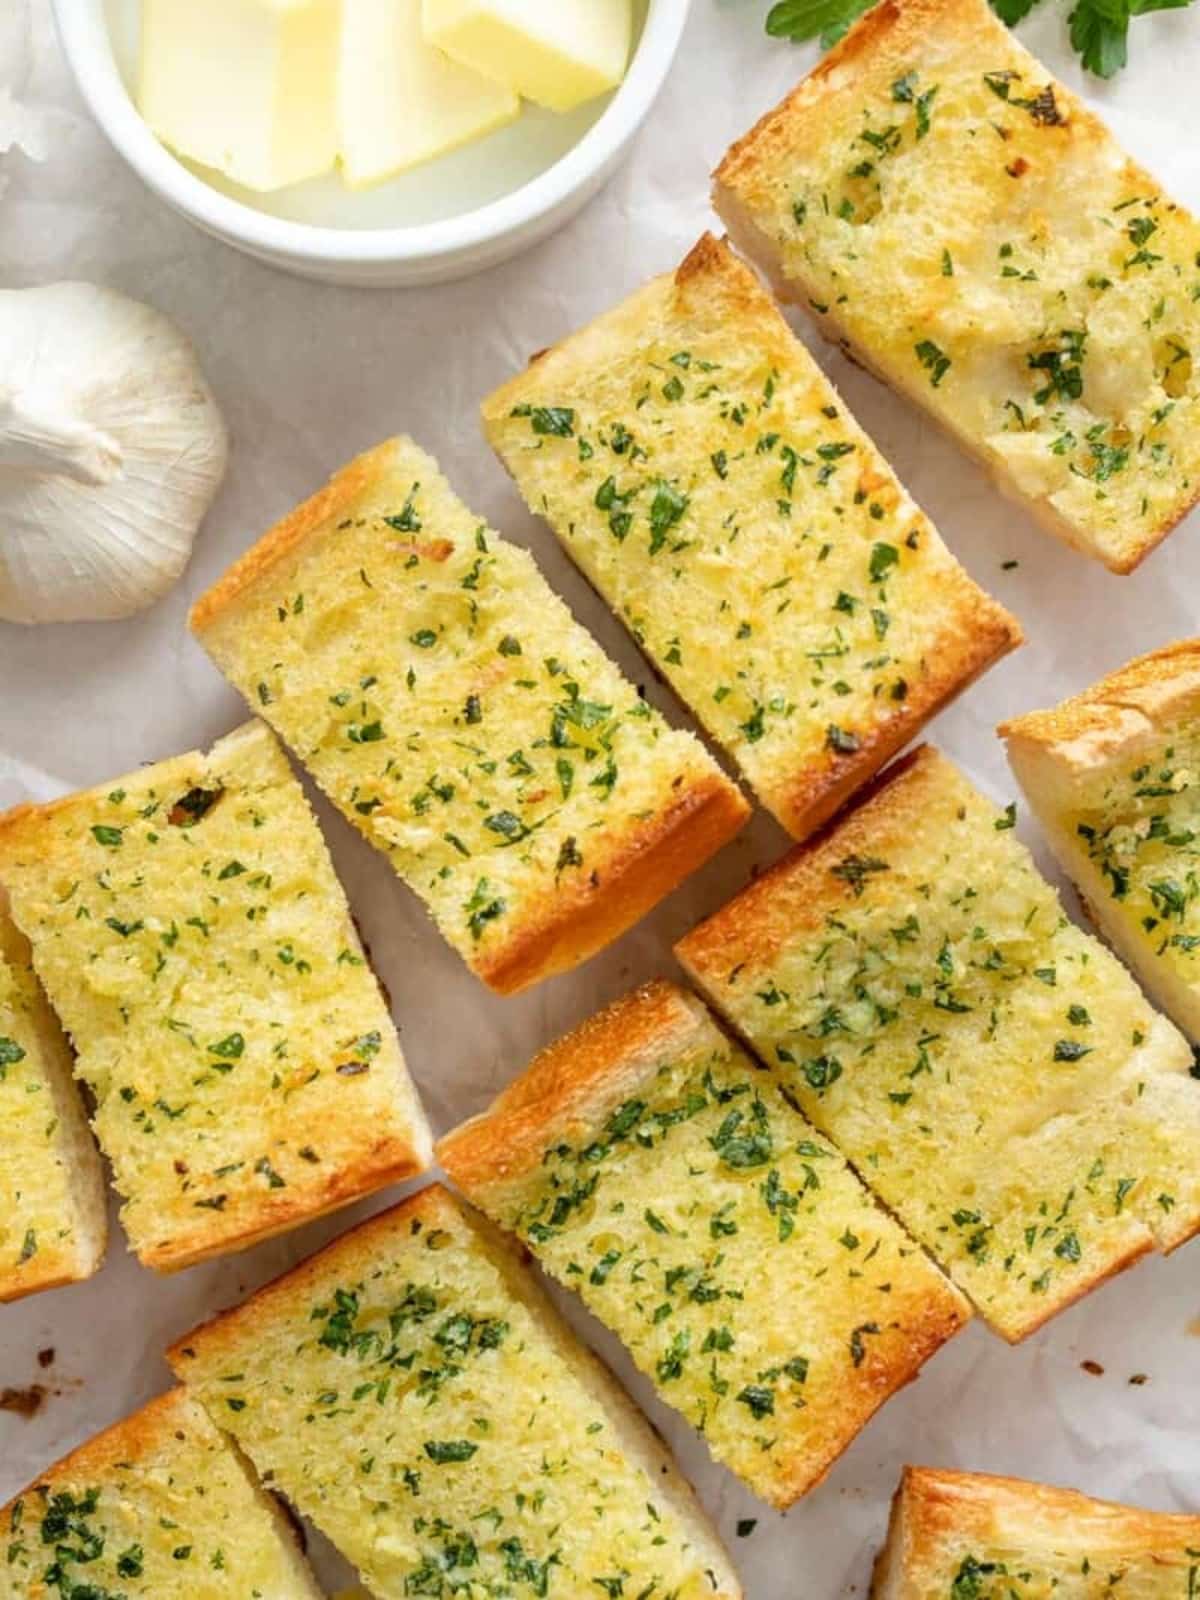 Sliced garlic bread with butter and parmesan cheese.